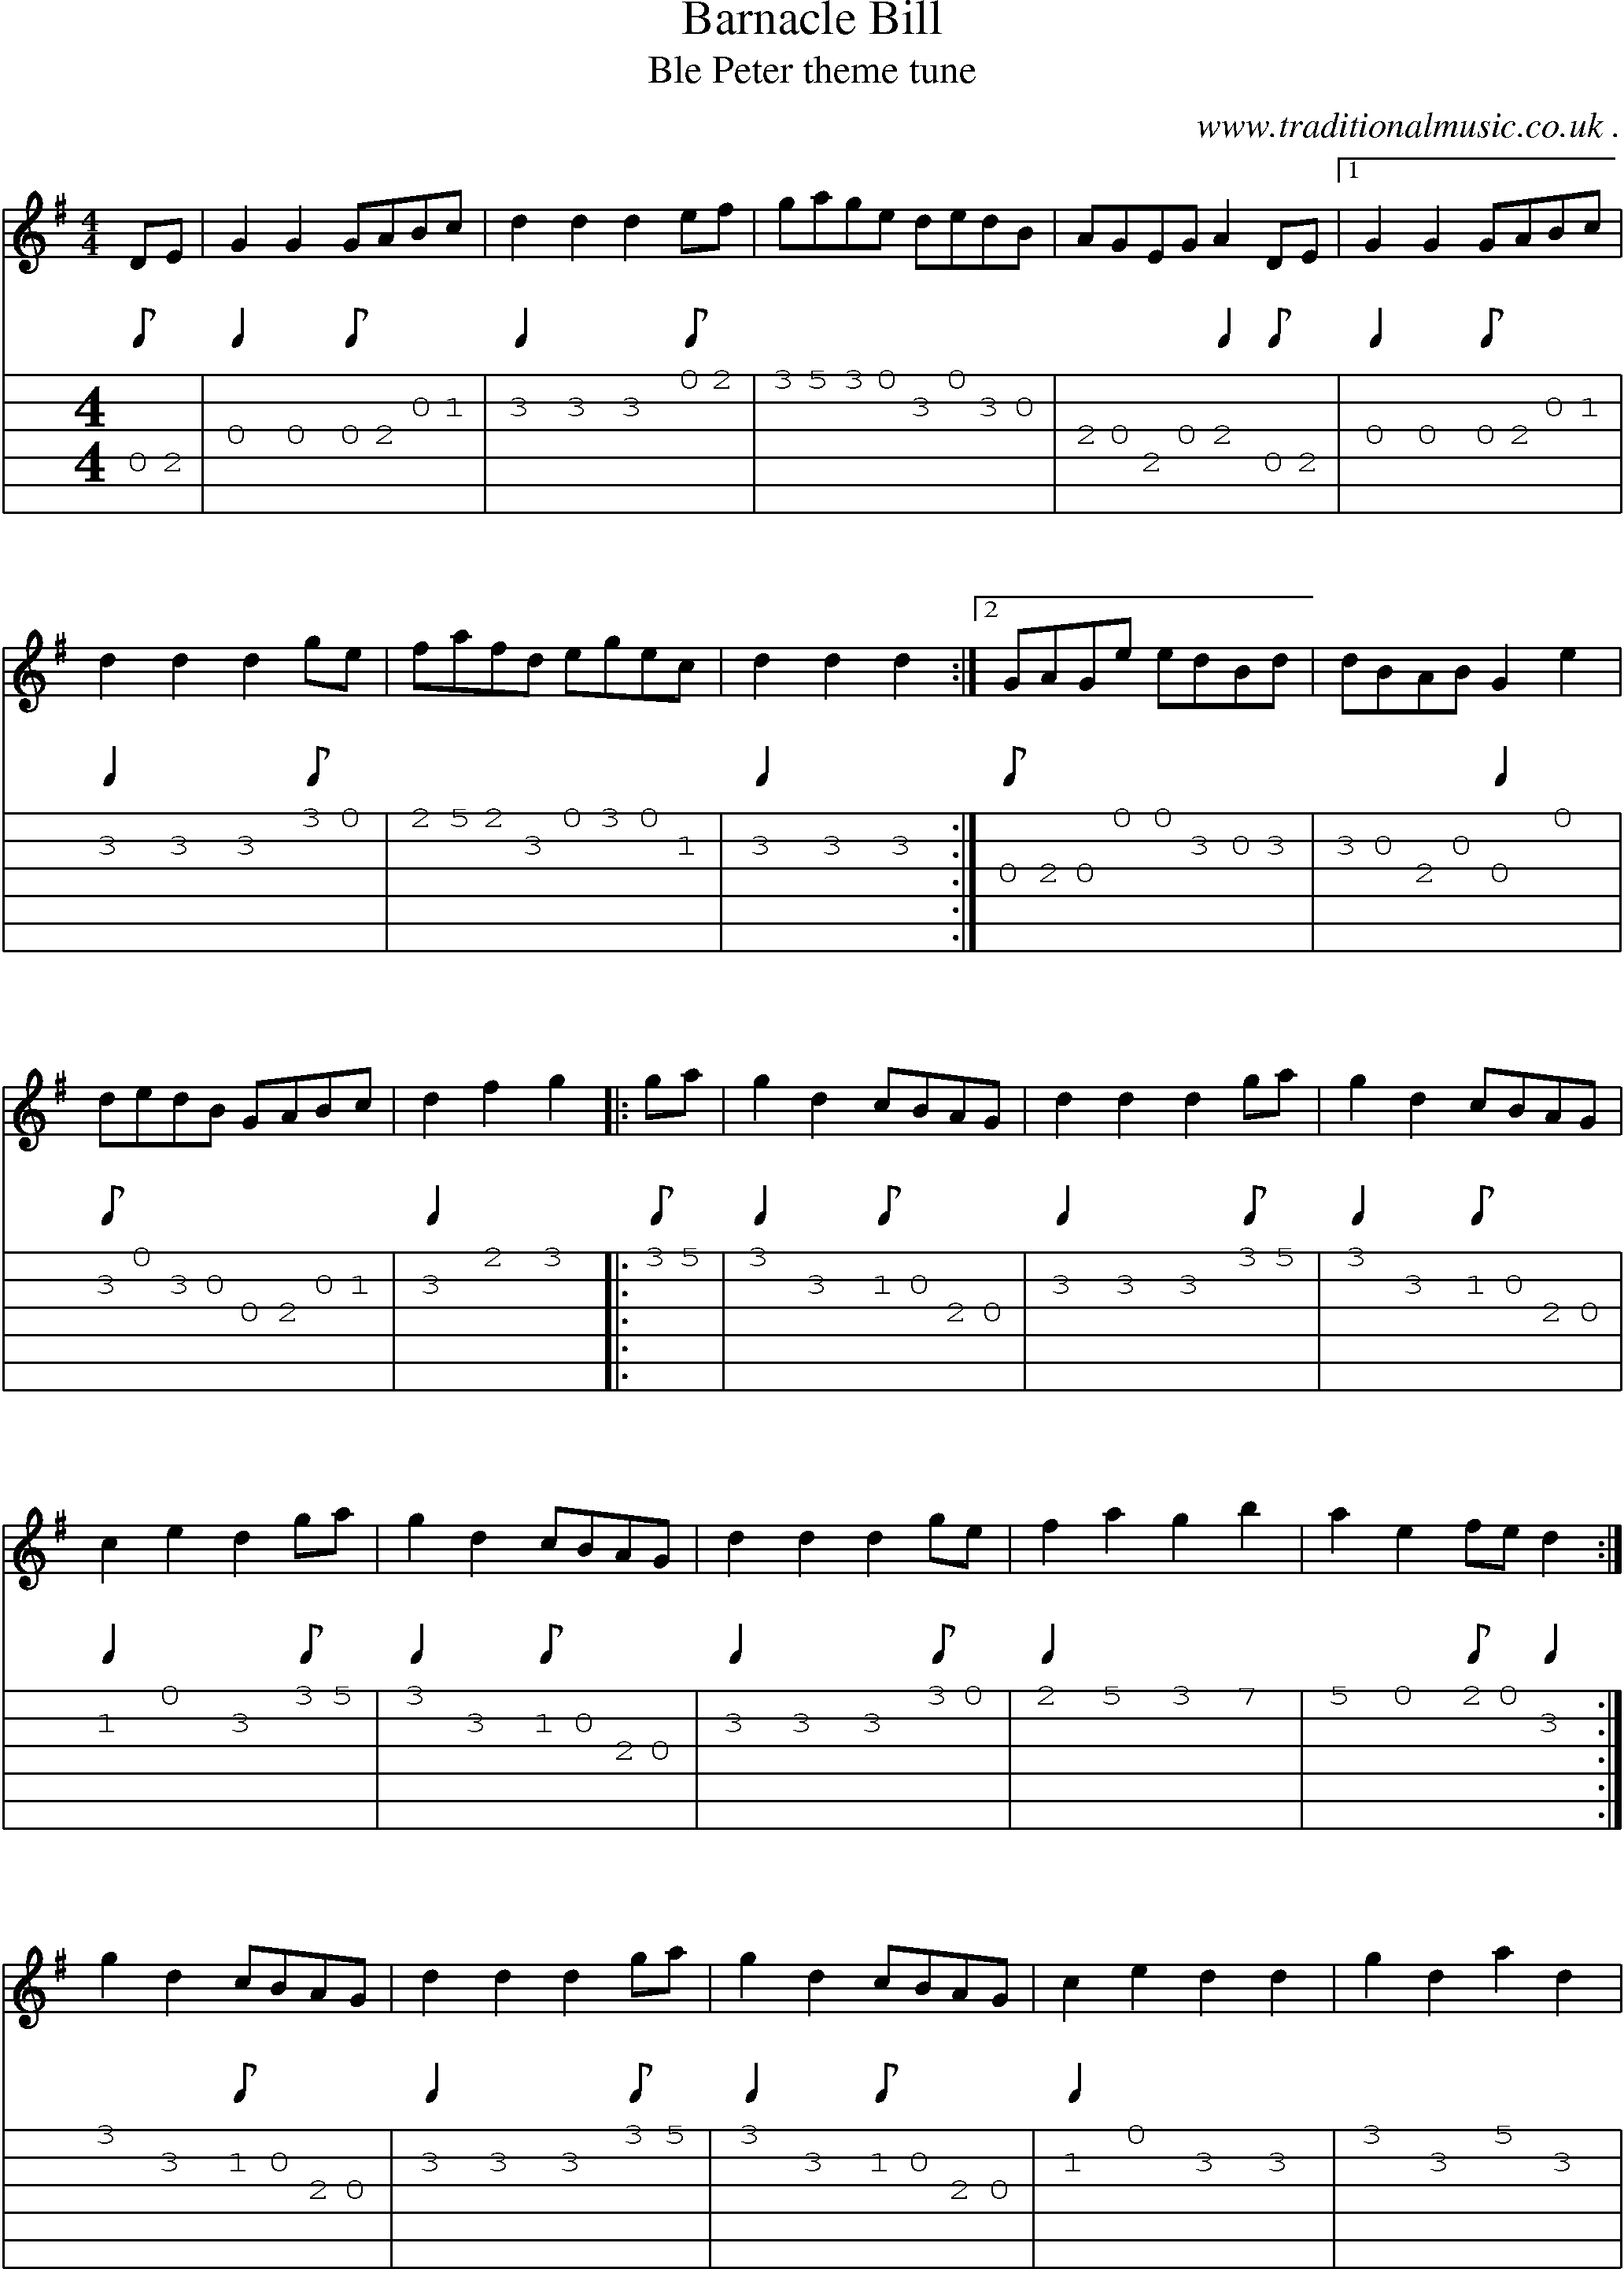 Sheet-Music and Guitar Tabs for Barnacle Bill